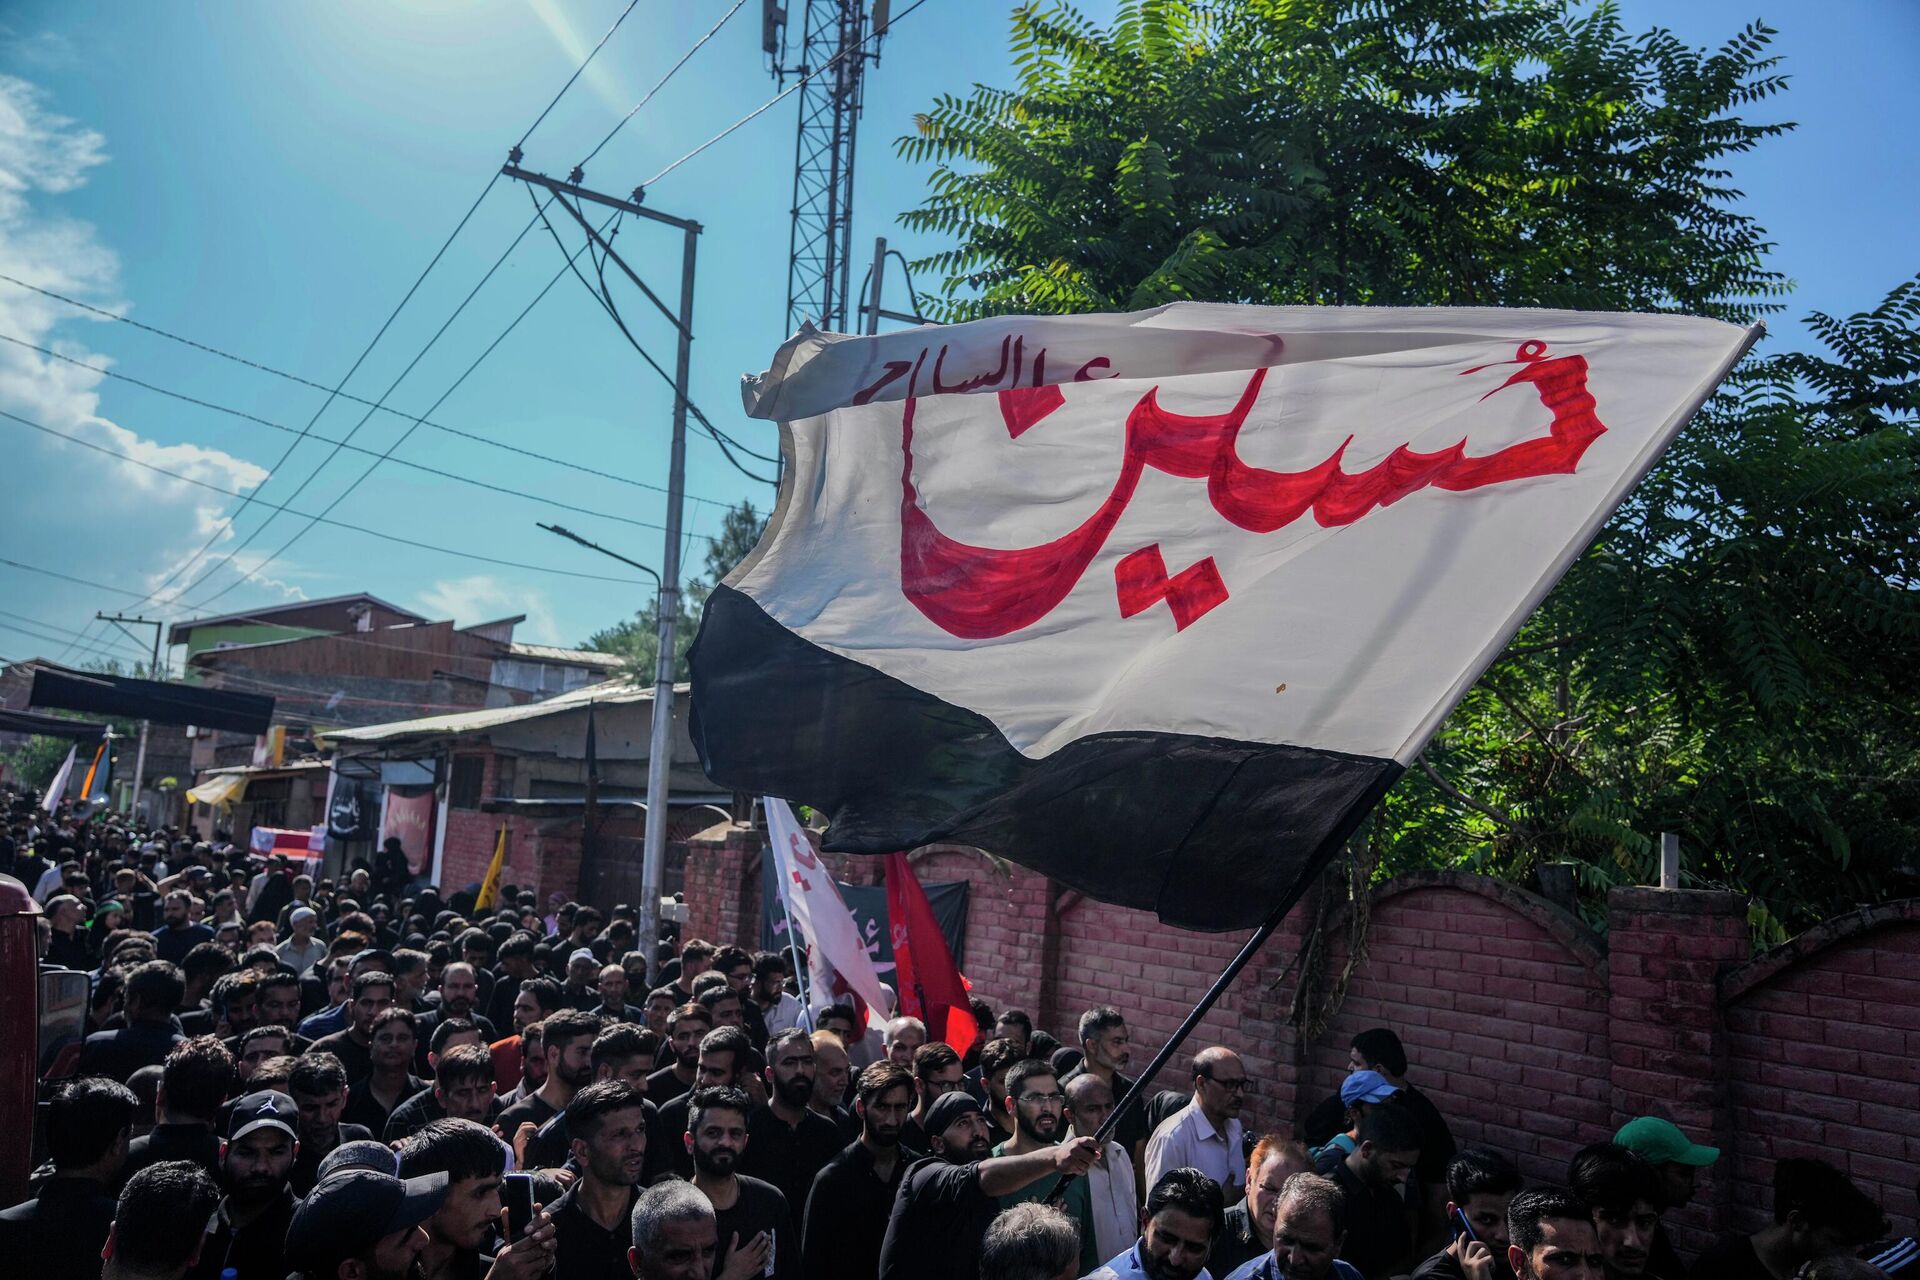 Kashmiri Shiite Muslims participate in a Muharram procession in Srinagar, Indian controlled Kashmir, Wednesday, July 26, 2023. Muharram is a month of mourning for Shiite Muslims in remembrance of the martyrdom of Imam Hussein, the grandson of the Prophet Muhammad. - Sputnik भारत, 1920, 27.07.2023